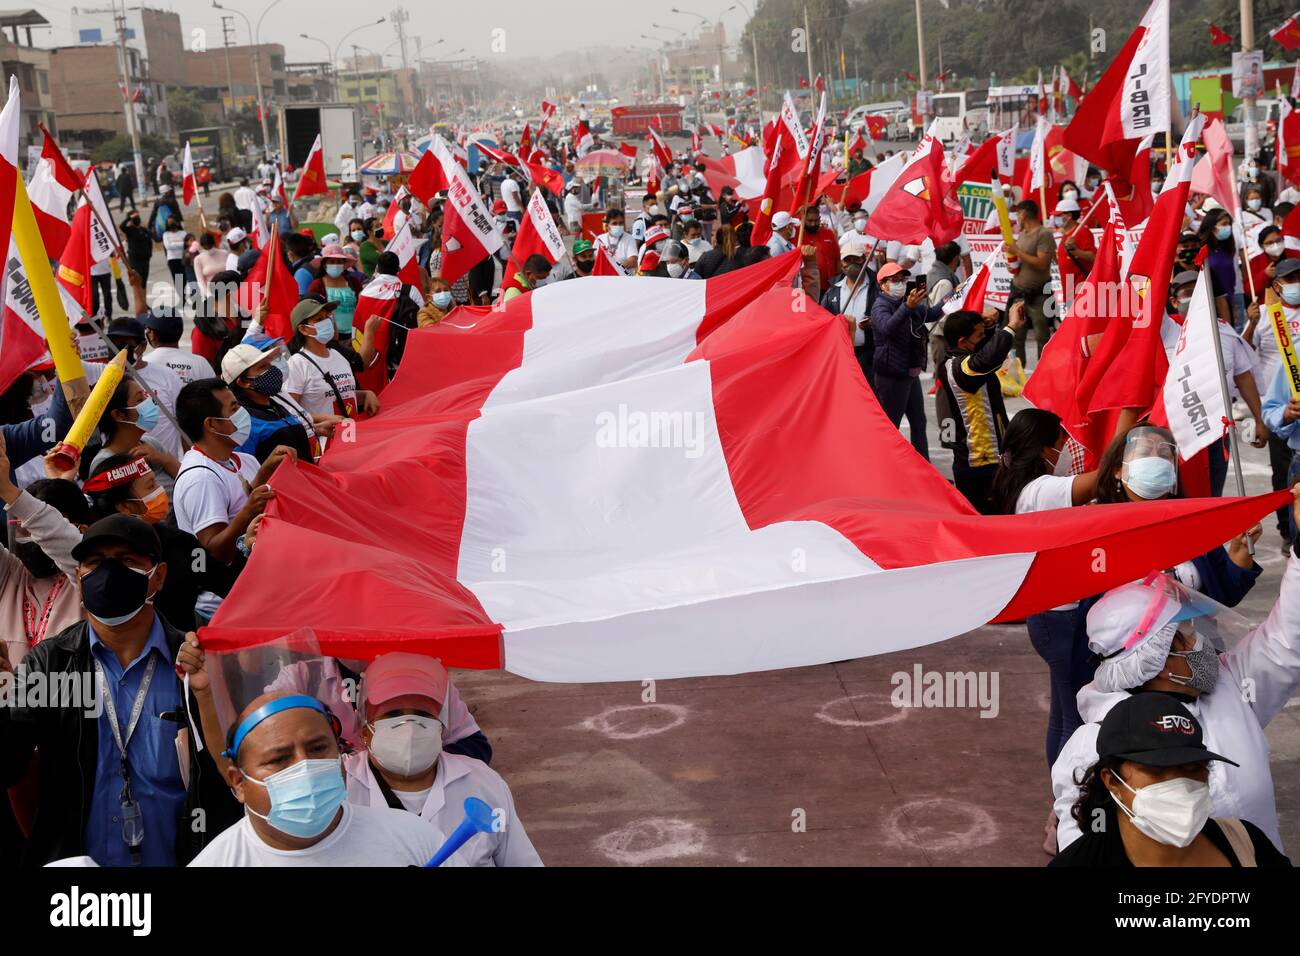 Lima, Peru. 26th May, 2021. People holding a Peruvian flag attend a campaign rally for Presidential candidate Pedro Castillo, in Villa El Salvador neighborhood. On June 6 Peruvians will go to the polls to elect new President between Castillo and Keiko Fujimori. Credit: Mariana Bazo/ZUMA Wire/Alamy Live News Stock Photo